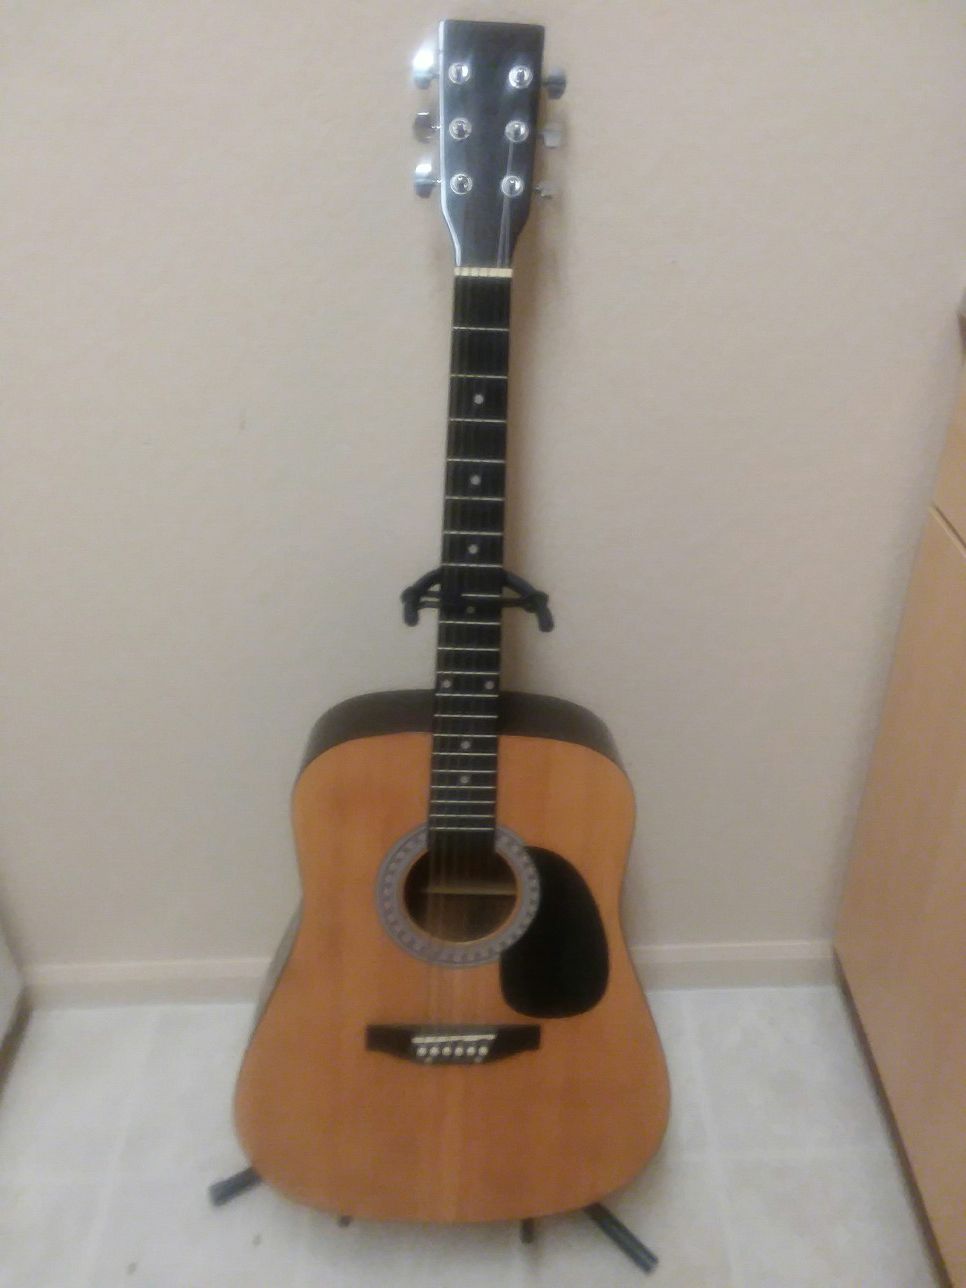 Signed Esteban Acoustic Guitar with Complete Course Package